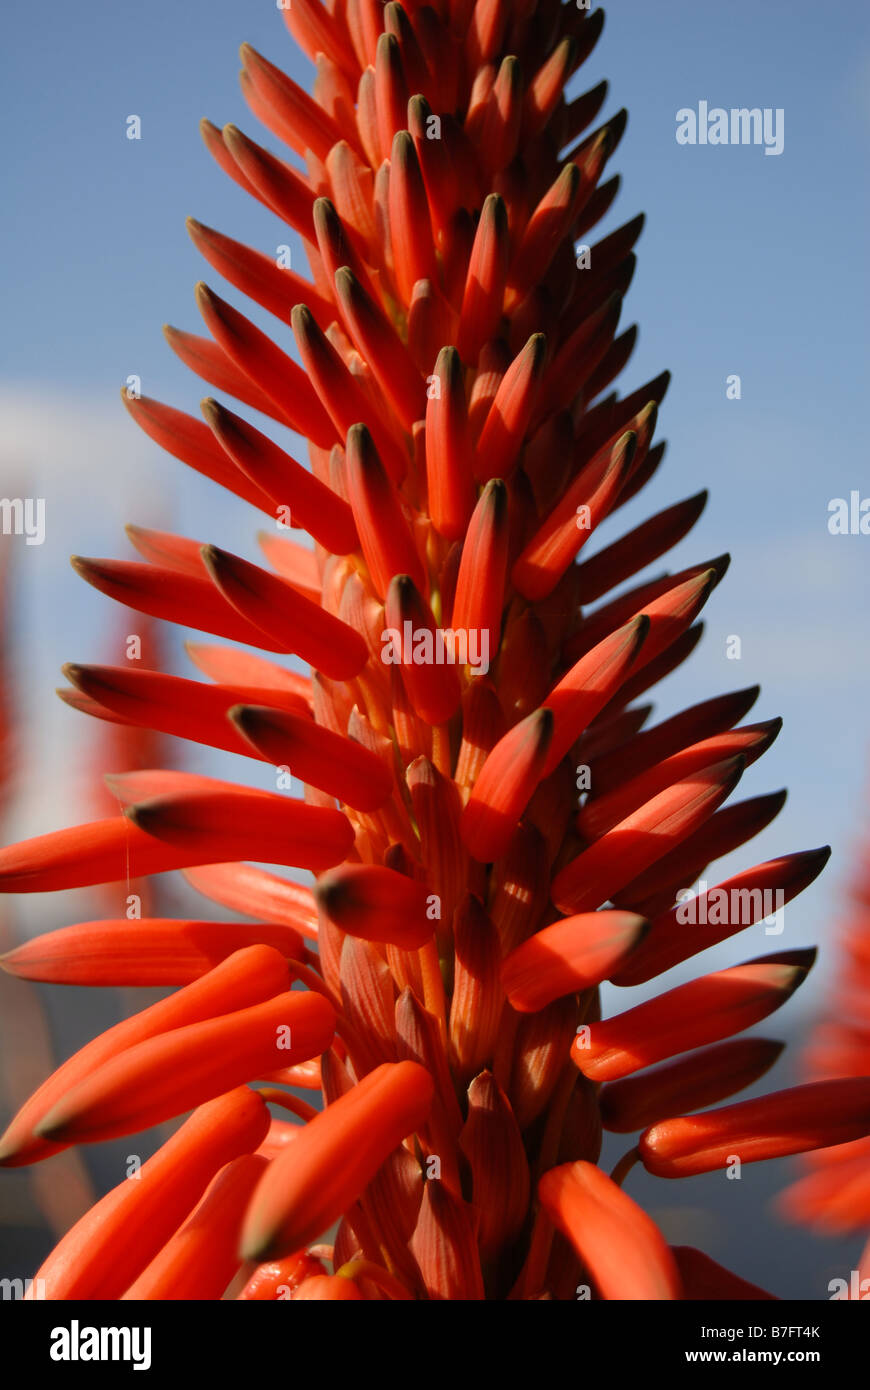 Sword Aloe , close up view of a Flower growing wild and found in North Africa and Madeira in Portugal Stock Photo